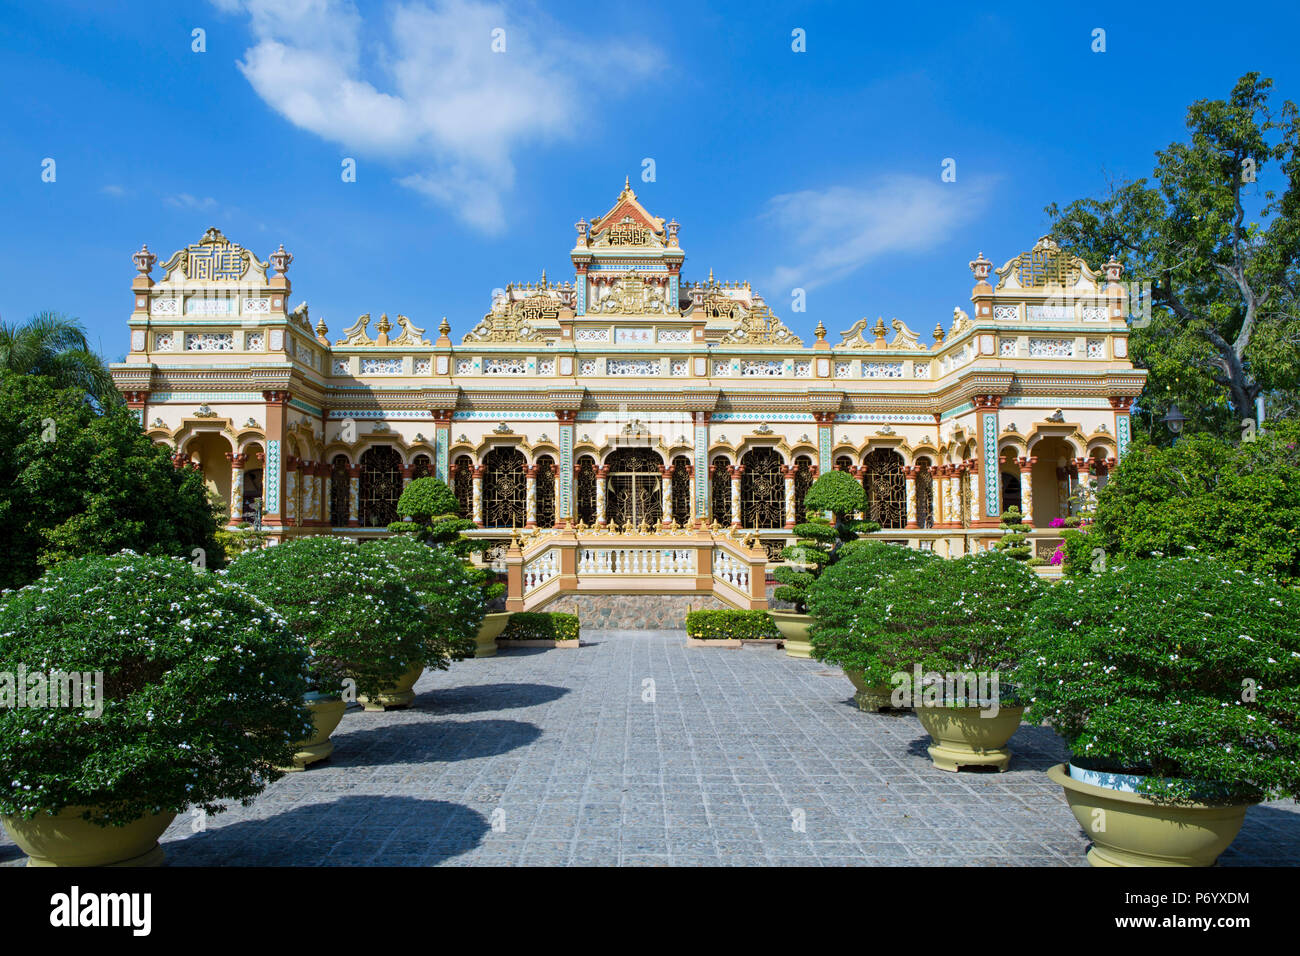 Asia, South East Asia, Vietnam, Mekong Delta, My Tho, Vinh Trang, Buddhist temple Stock Photo